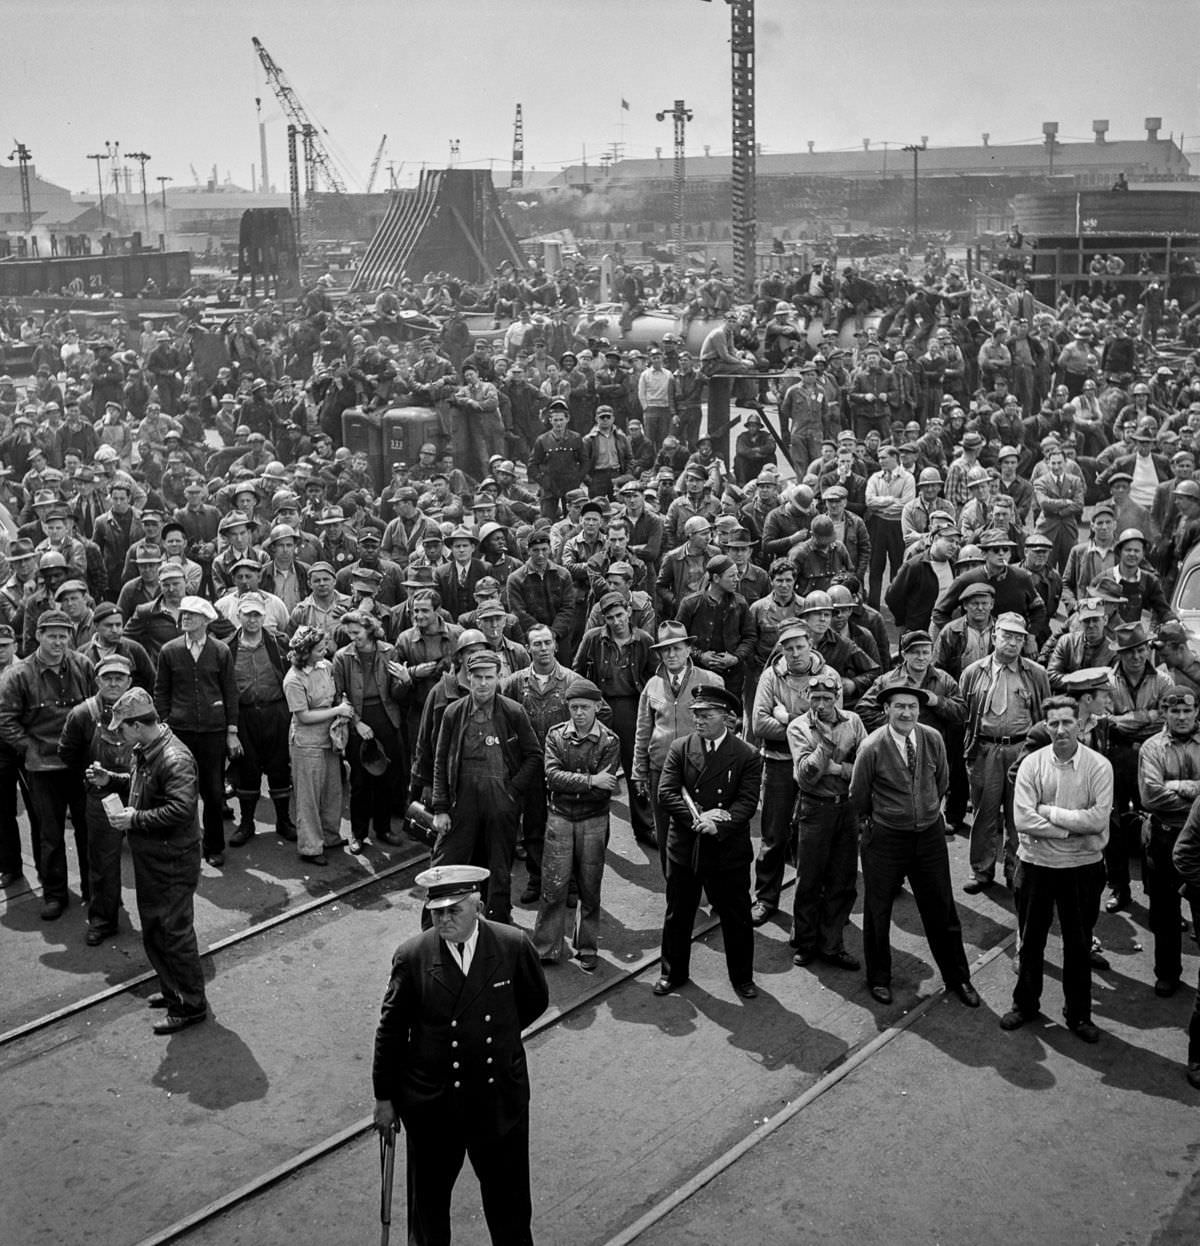 Workers gather for a ship launching ceremony